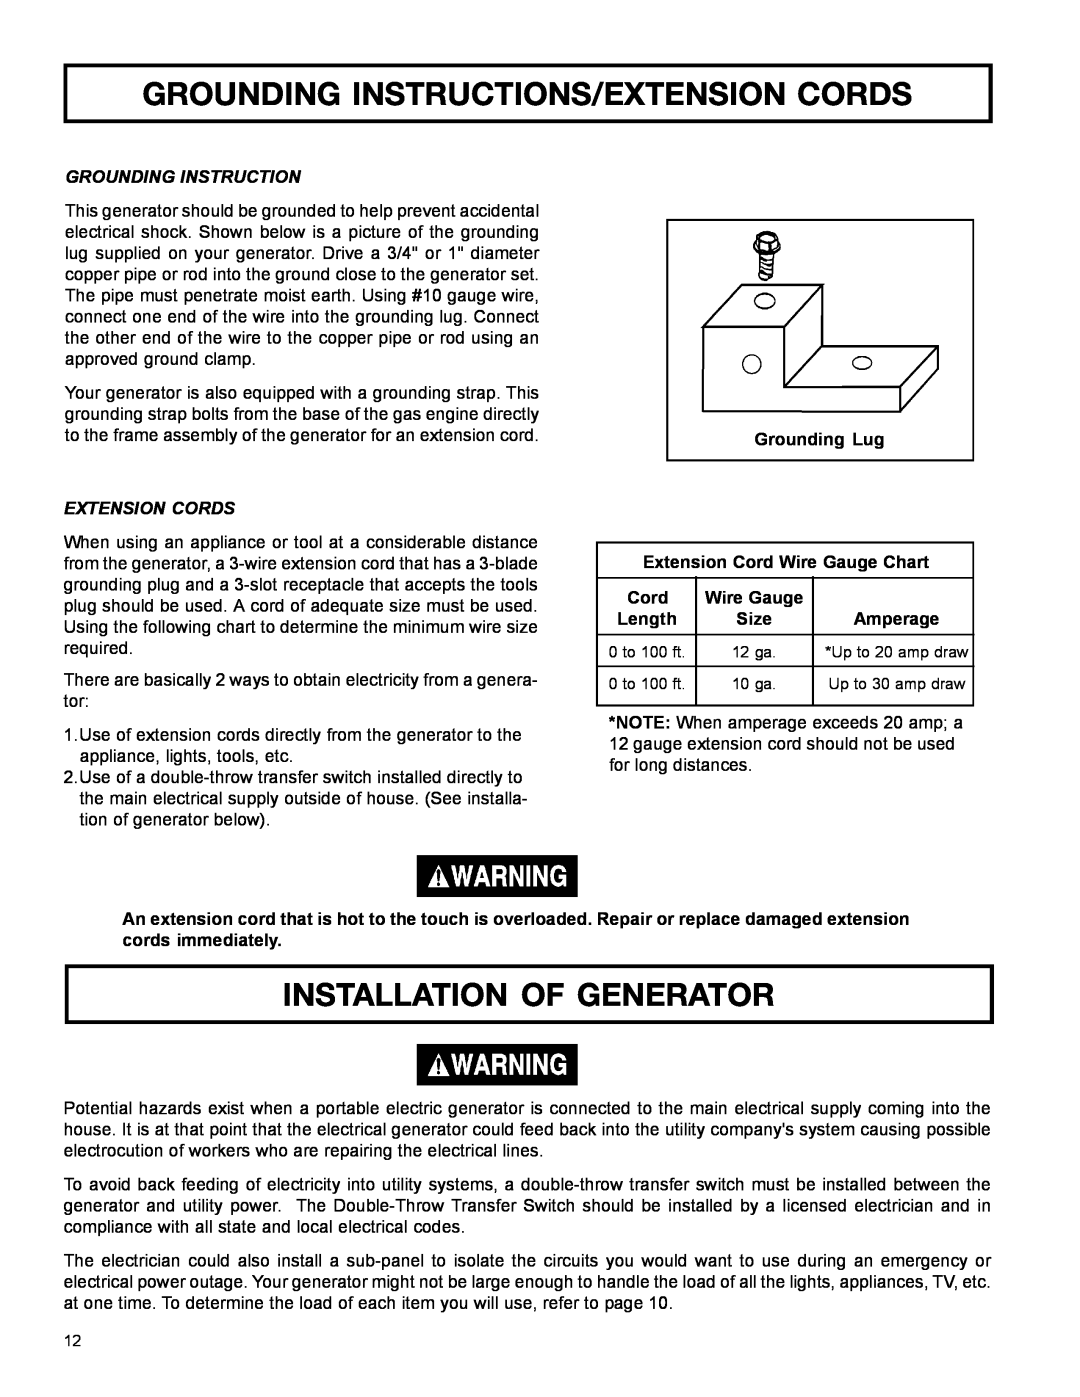 DeVillbiss Air Power Company MGP-4600 Grounding Instructions/Extension Cords, Installation Of Generator, Wire Gauge 